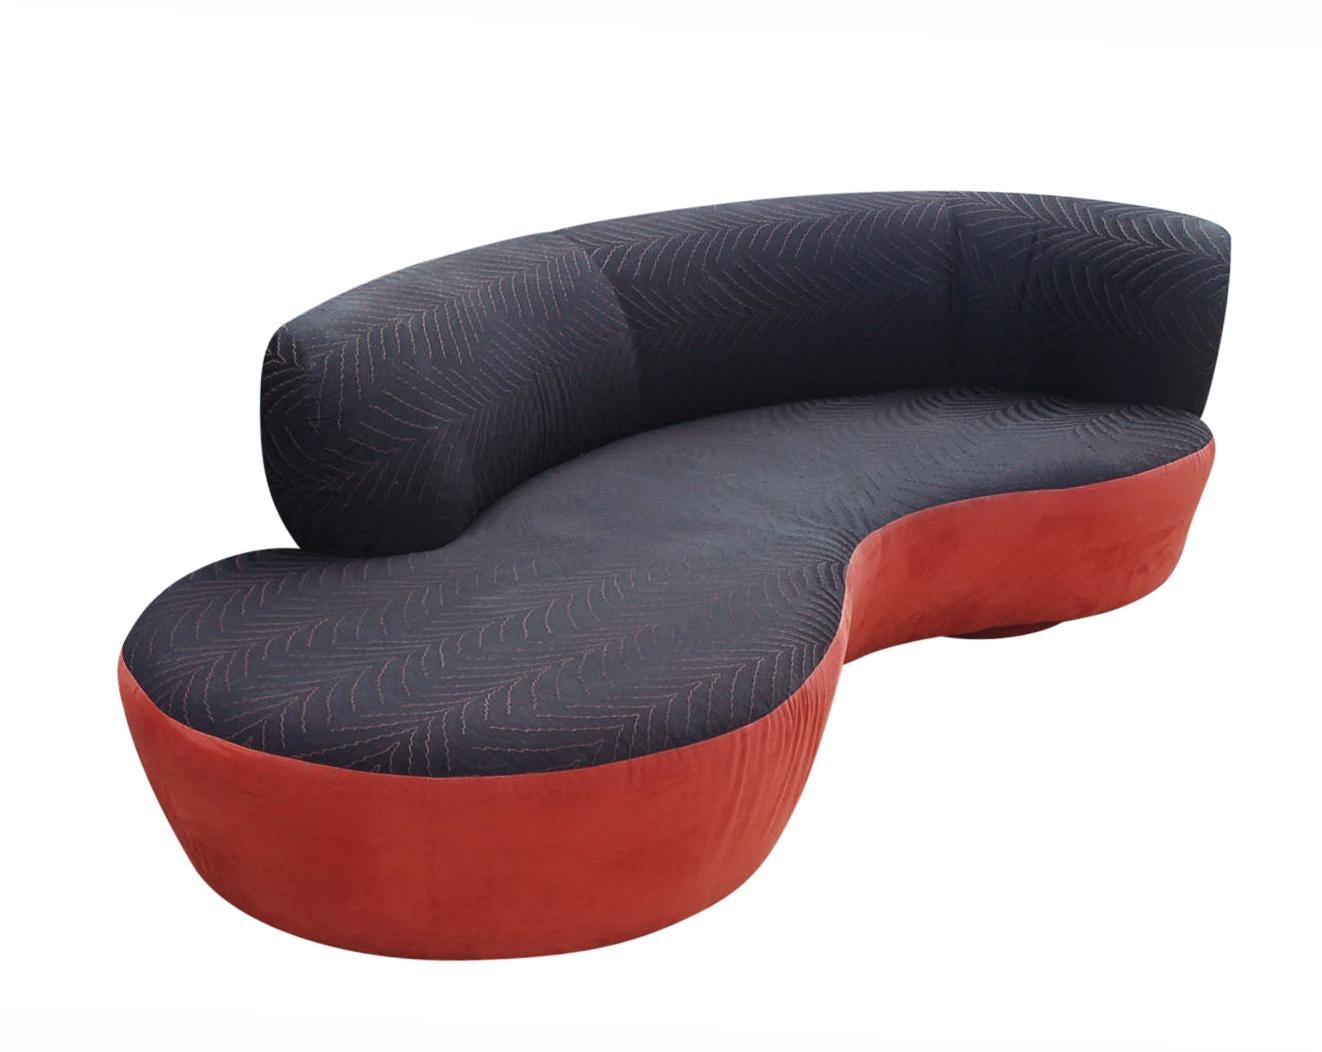 A sleek modern sofa designed by Weiman in the 1980s. It features a curved design, with circular platform bases, and original textured print upholstery. Needs recovering. Manufacture label.